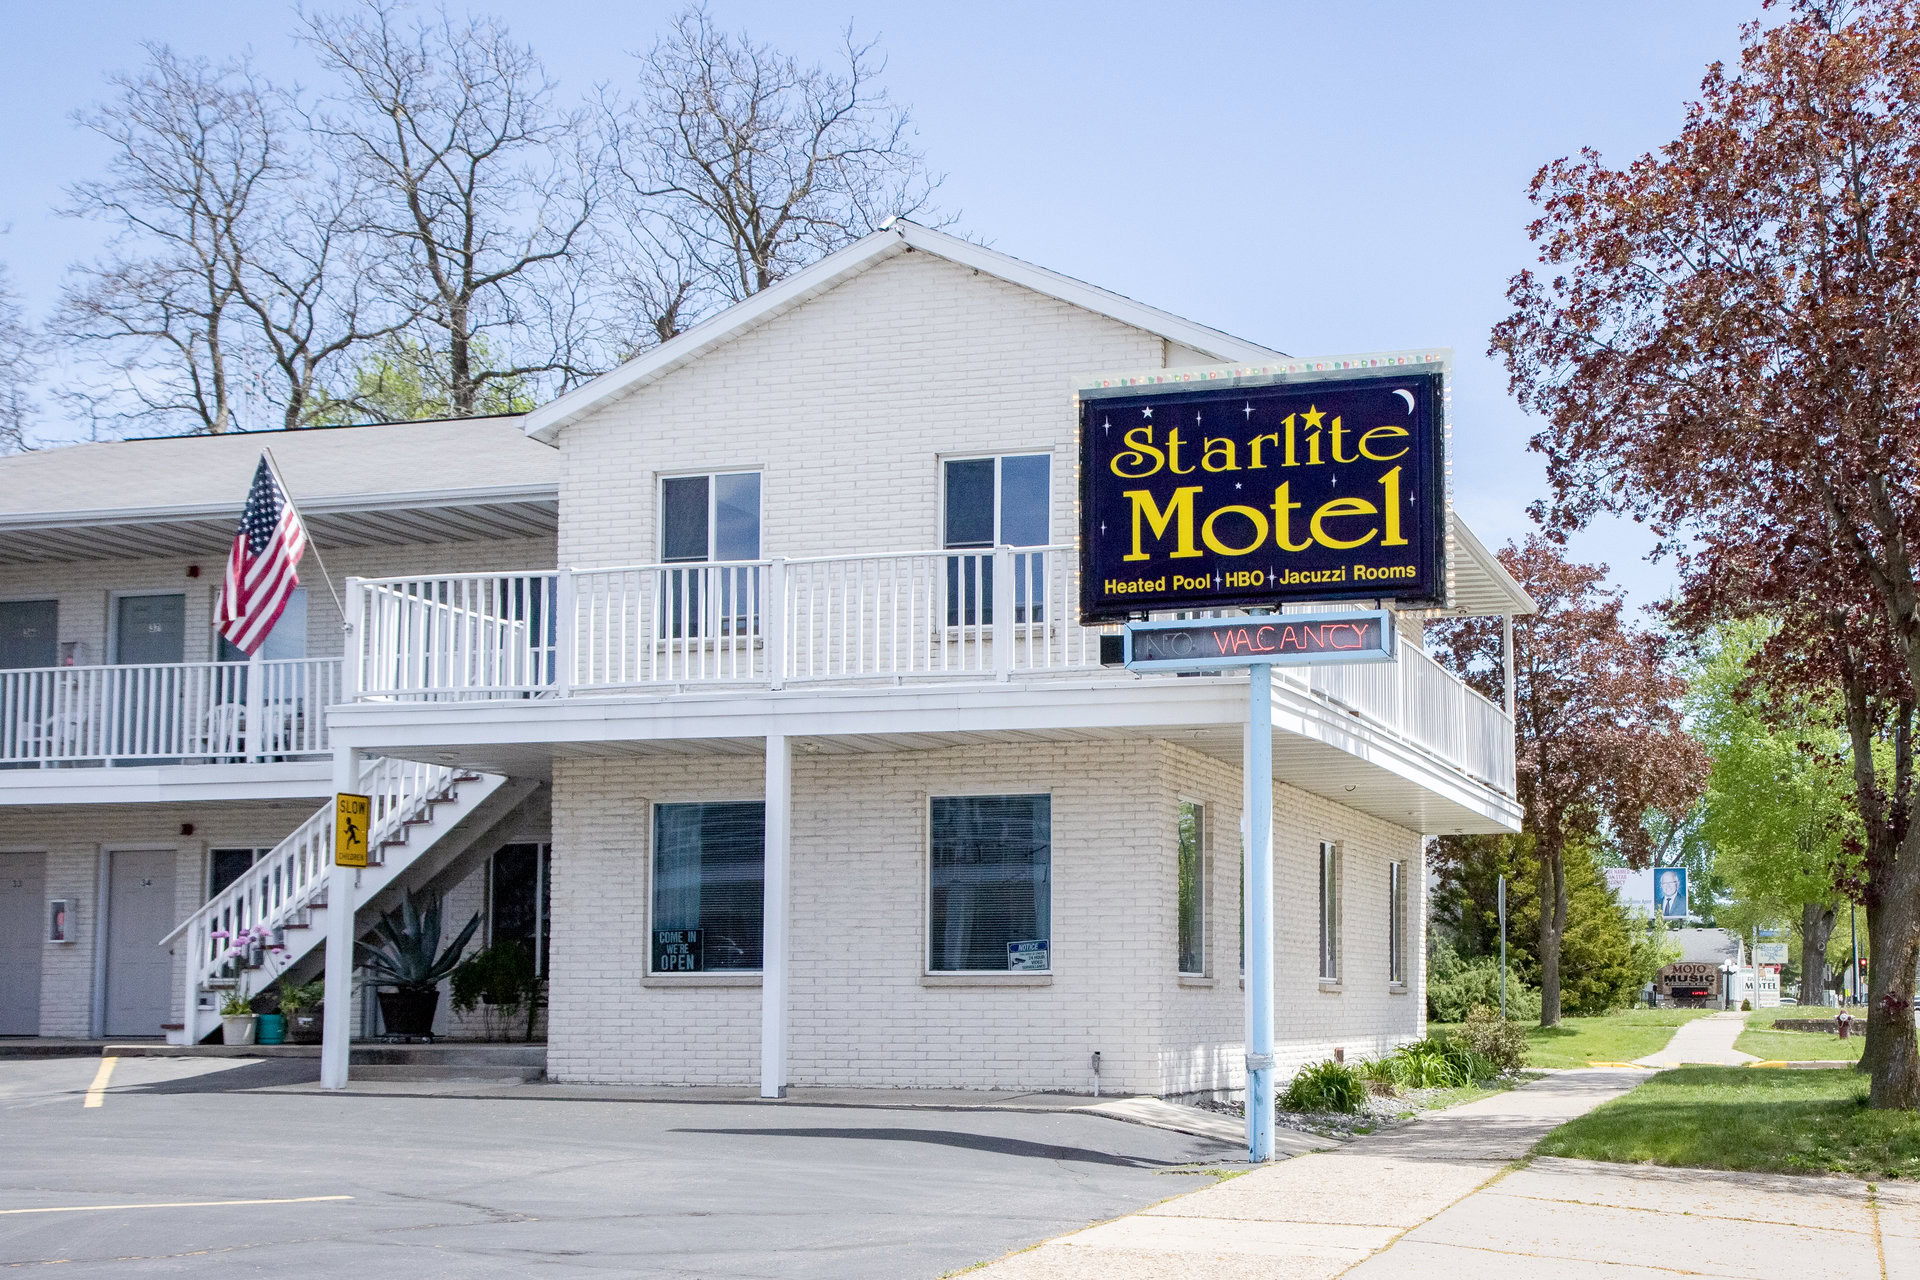 Starlite Motel outdoor view of entrance and the lobby